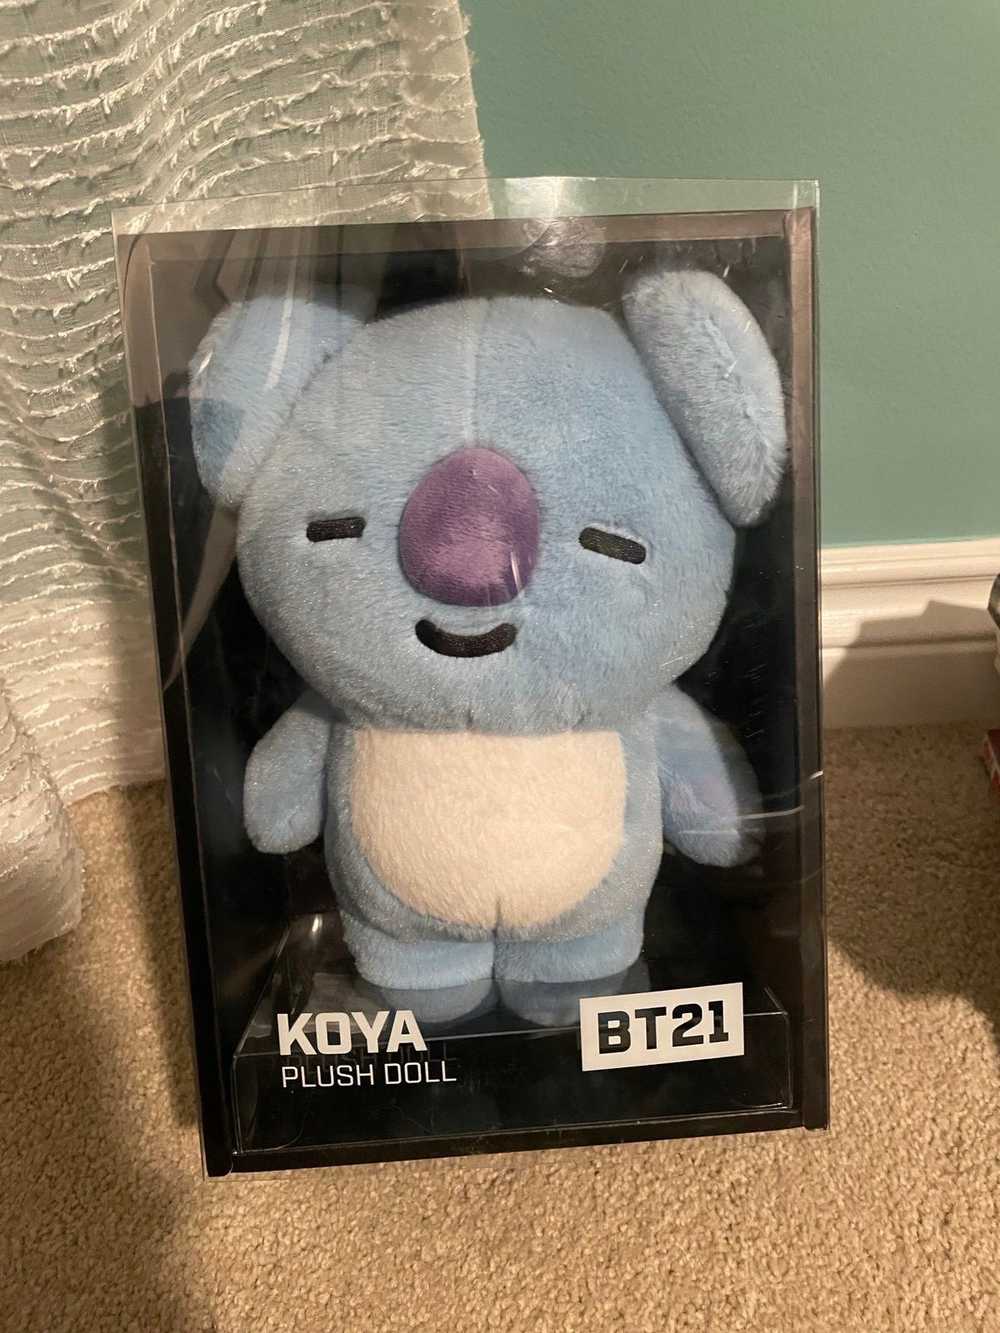 Other BT21 Koya Plush Standing Doll from Hot Topic - image 1